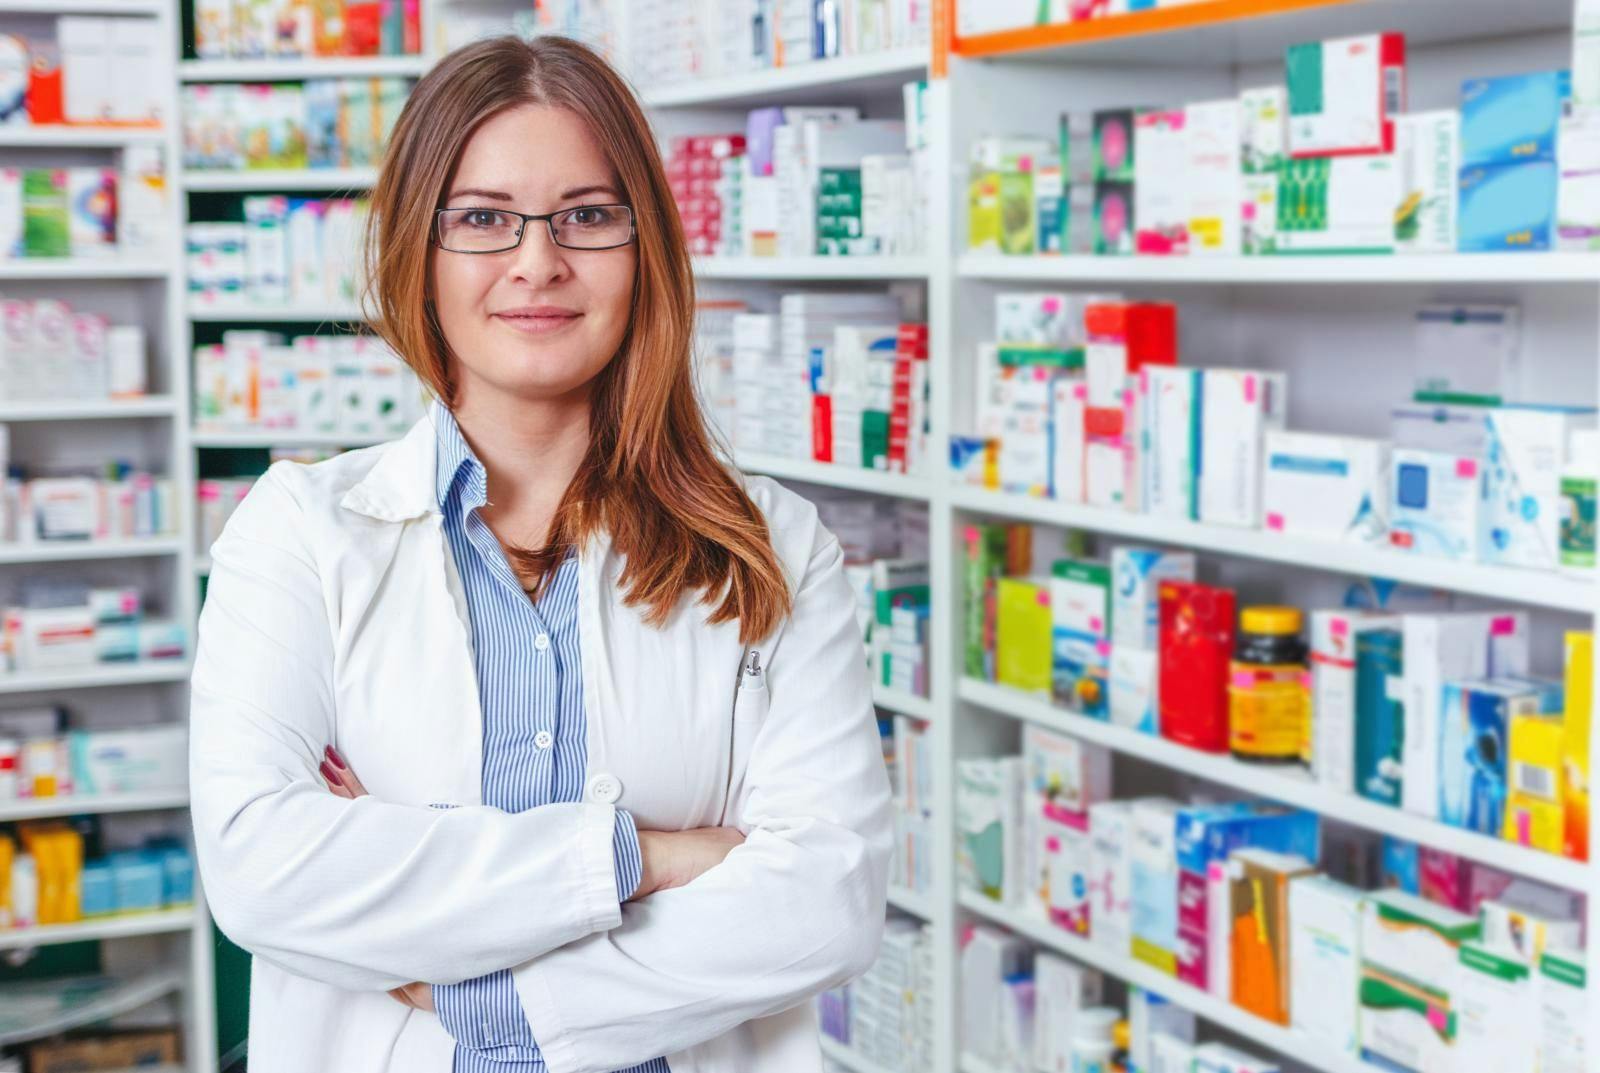 How Pharmacists Can Have Their Voices Heard in Public Policy